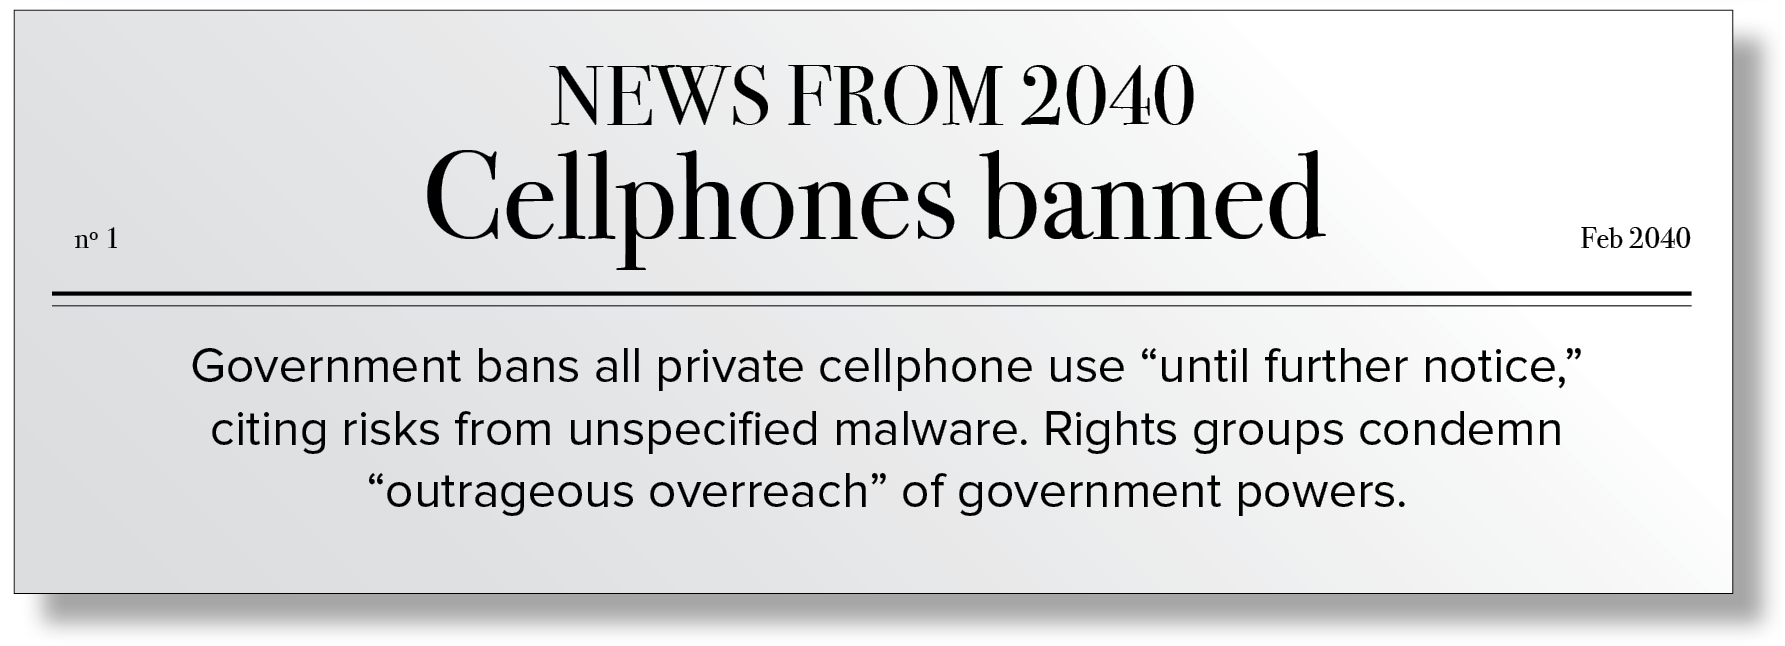 Fictional newspaper article from 2040 with the following text: Government bans all private cellphone use “until further notice,” citing risks from unspecified malware.  Rights groups condemn “outrageous overreach” of government powers.